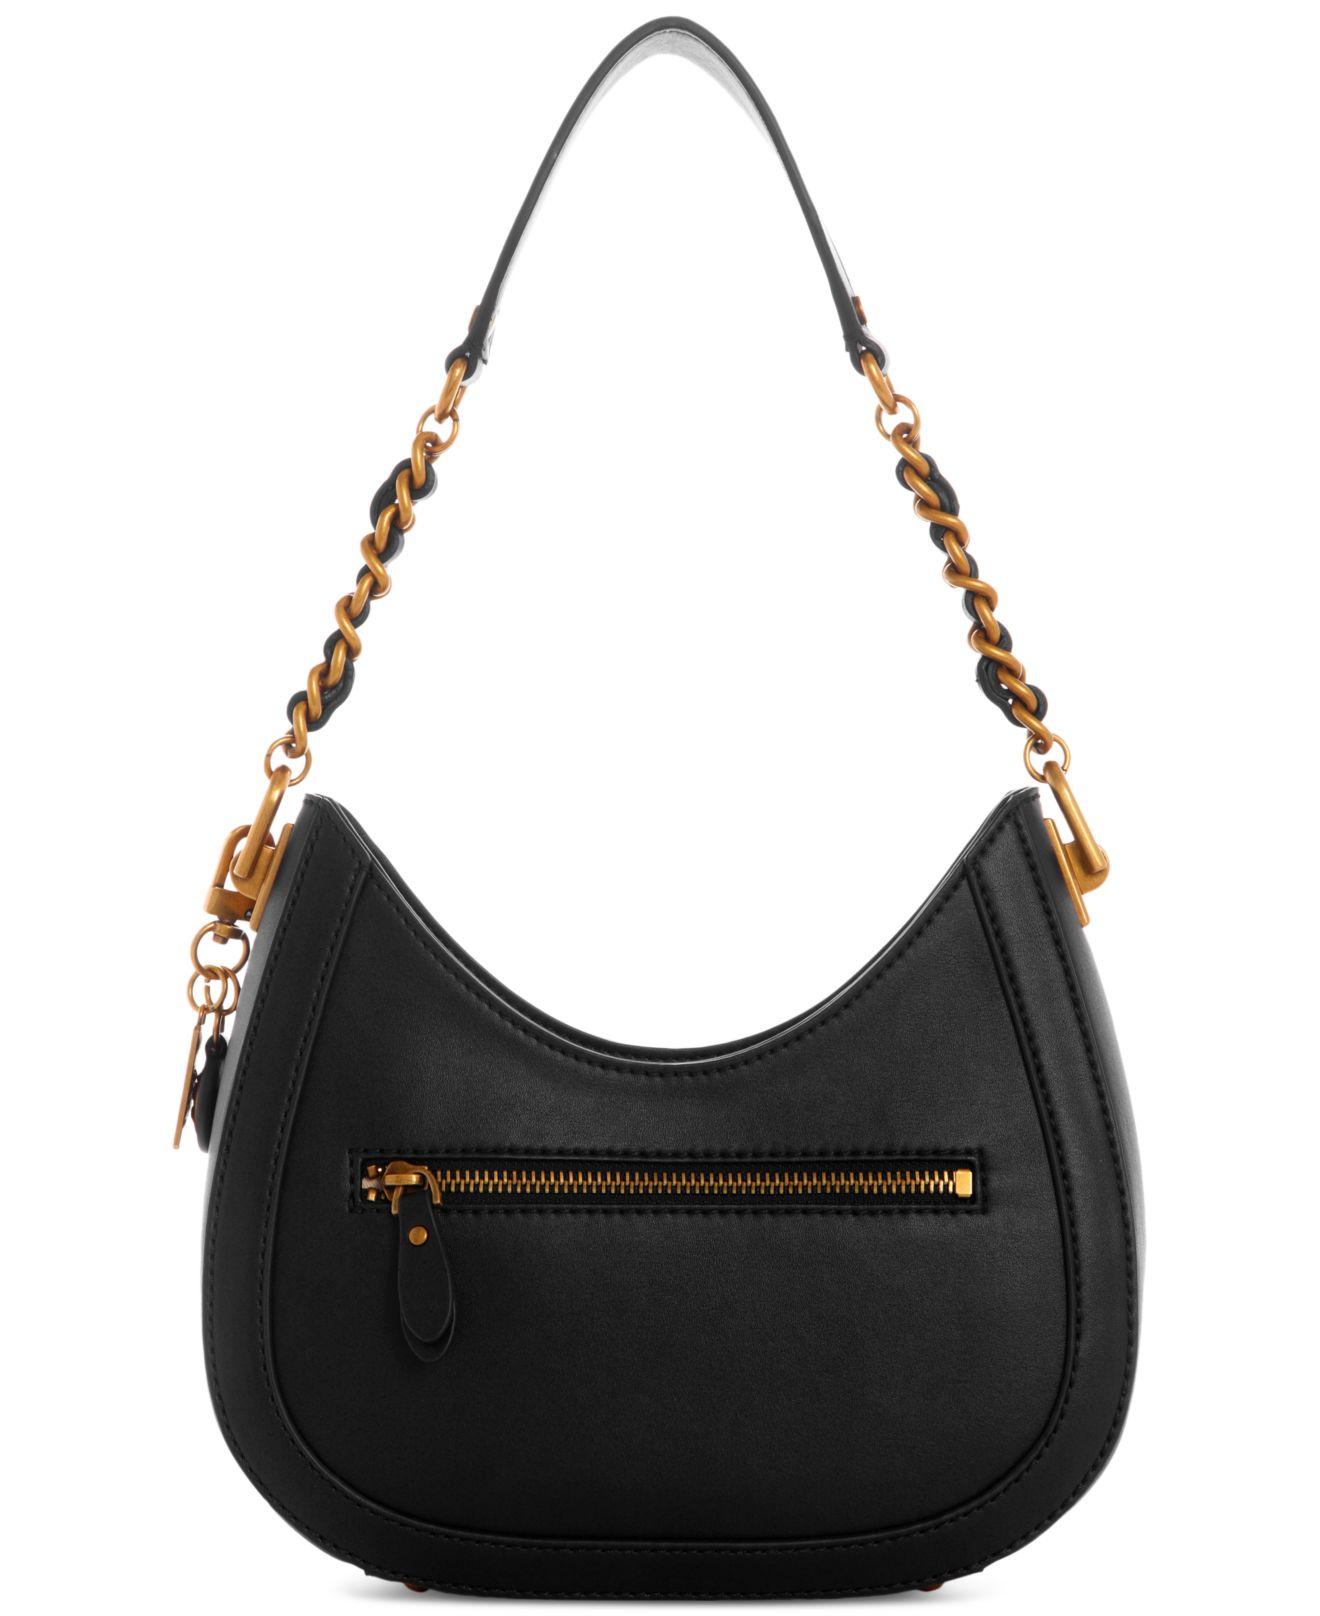 Guess Abey Small Hobo Bag in Black